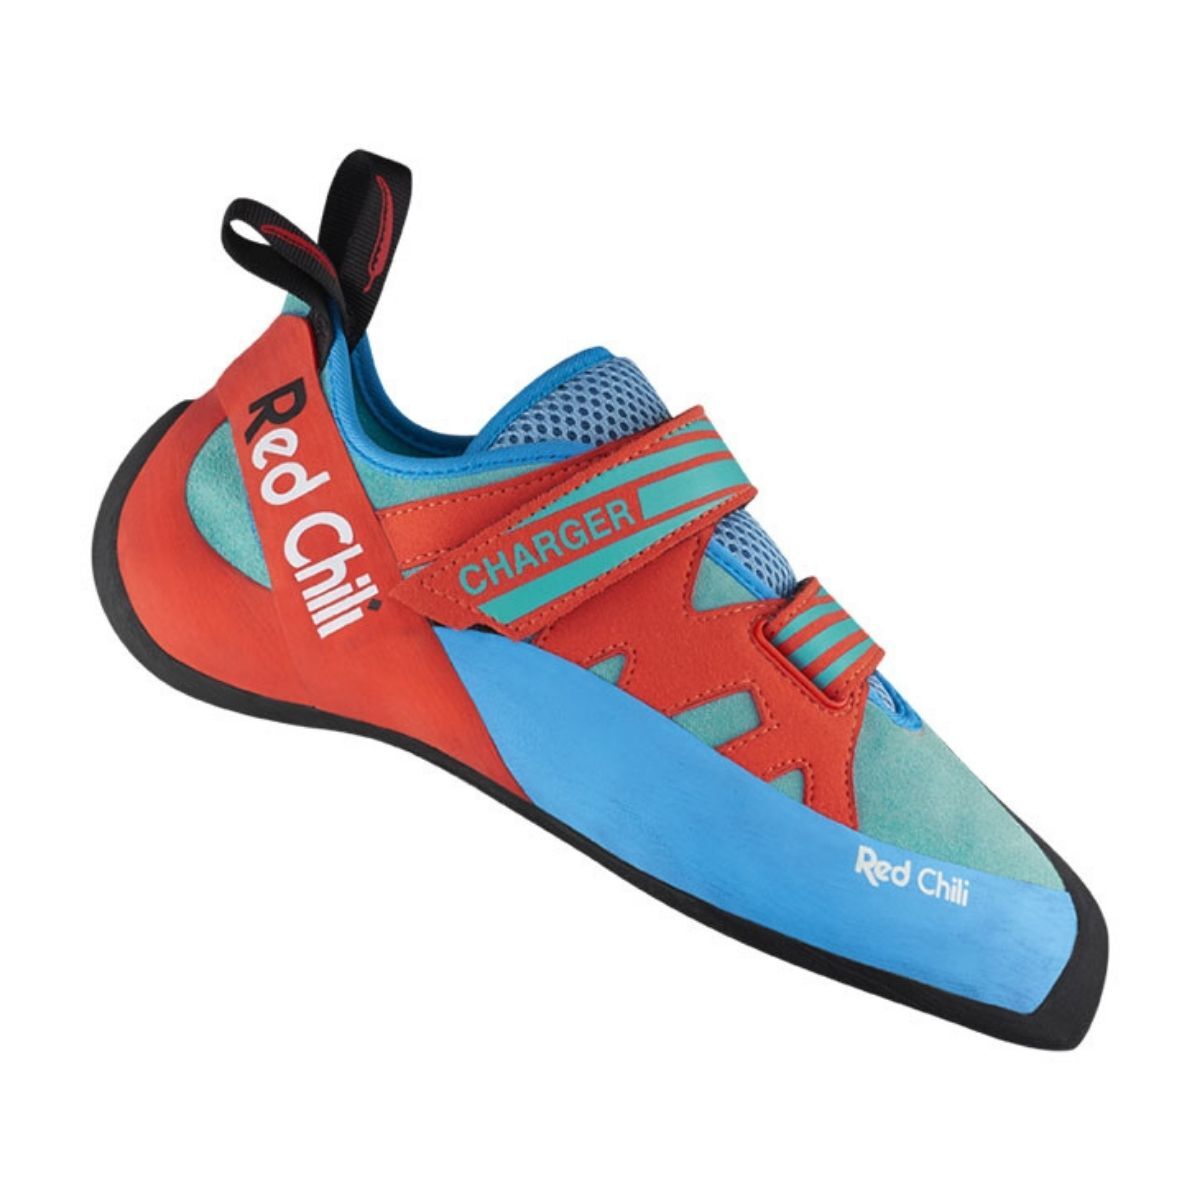 Red Chili Charger  - Climbing shoes